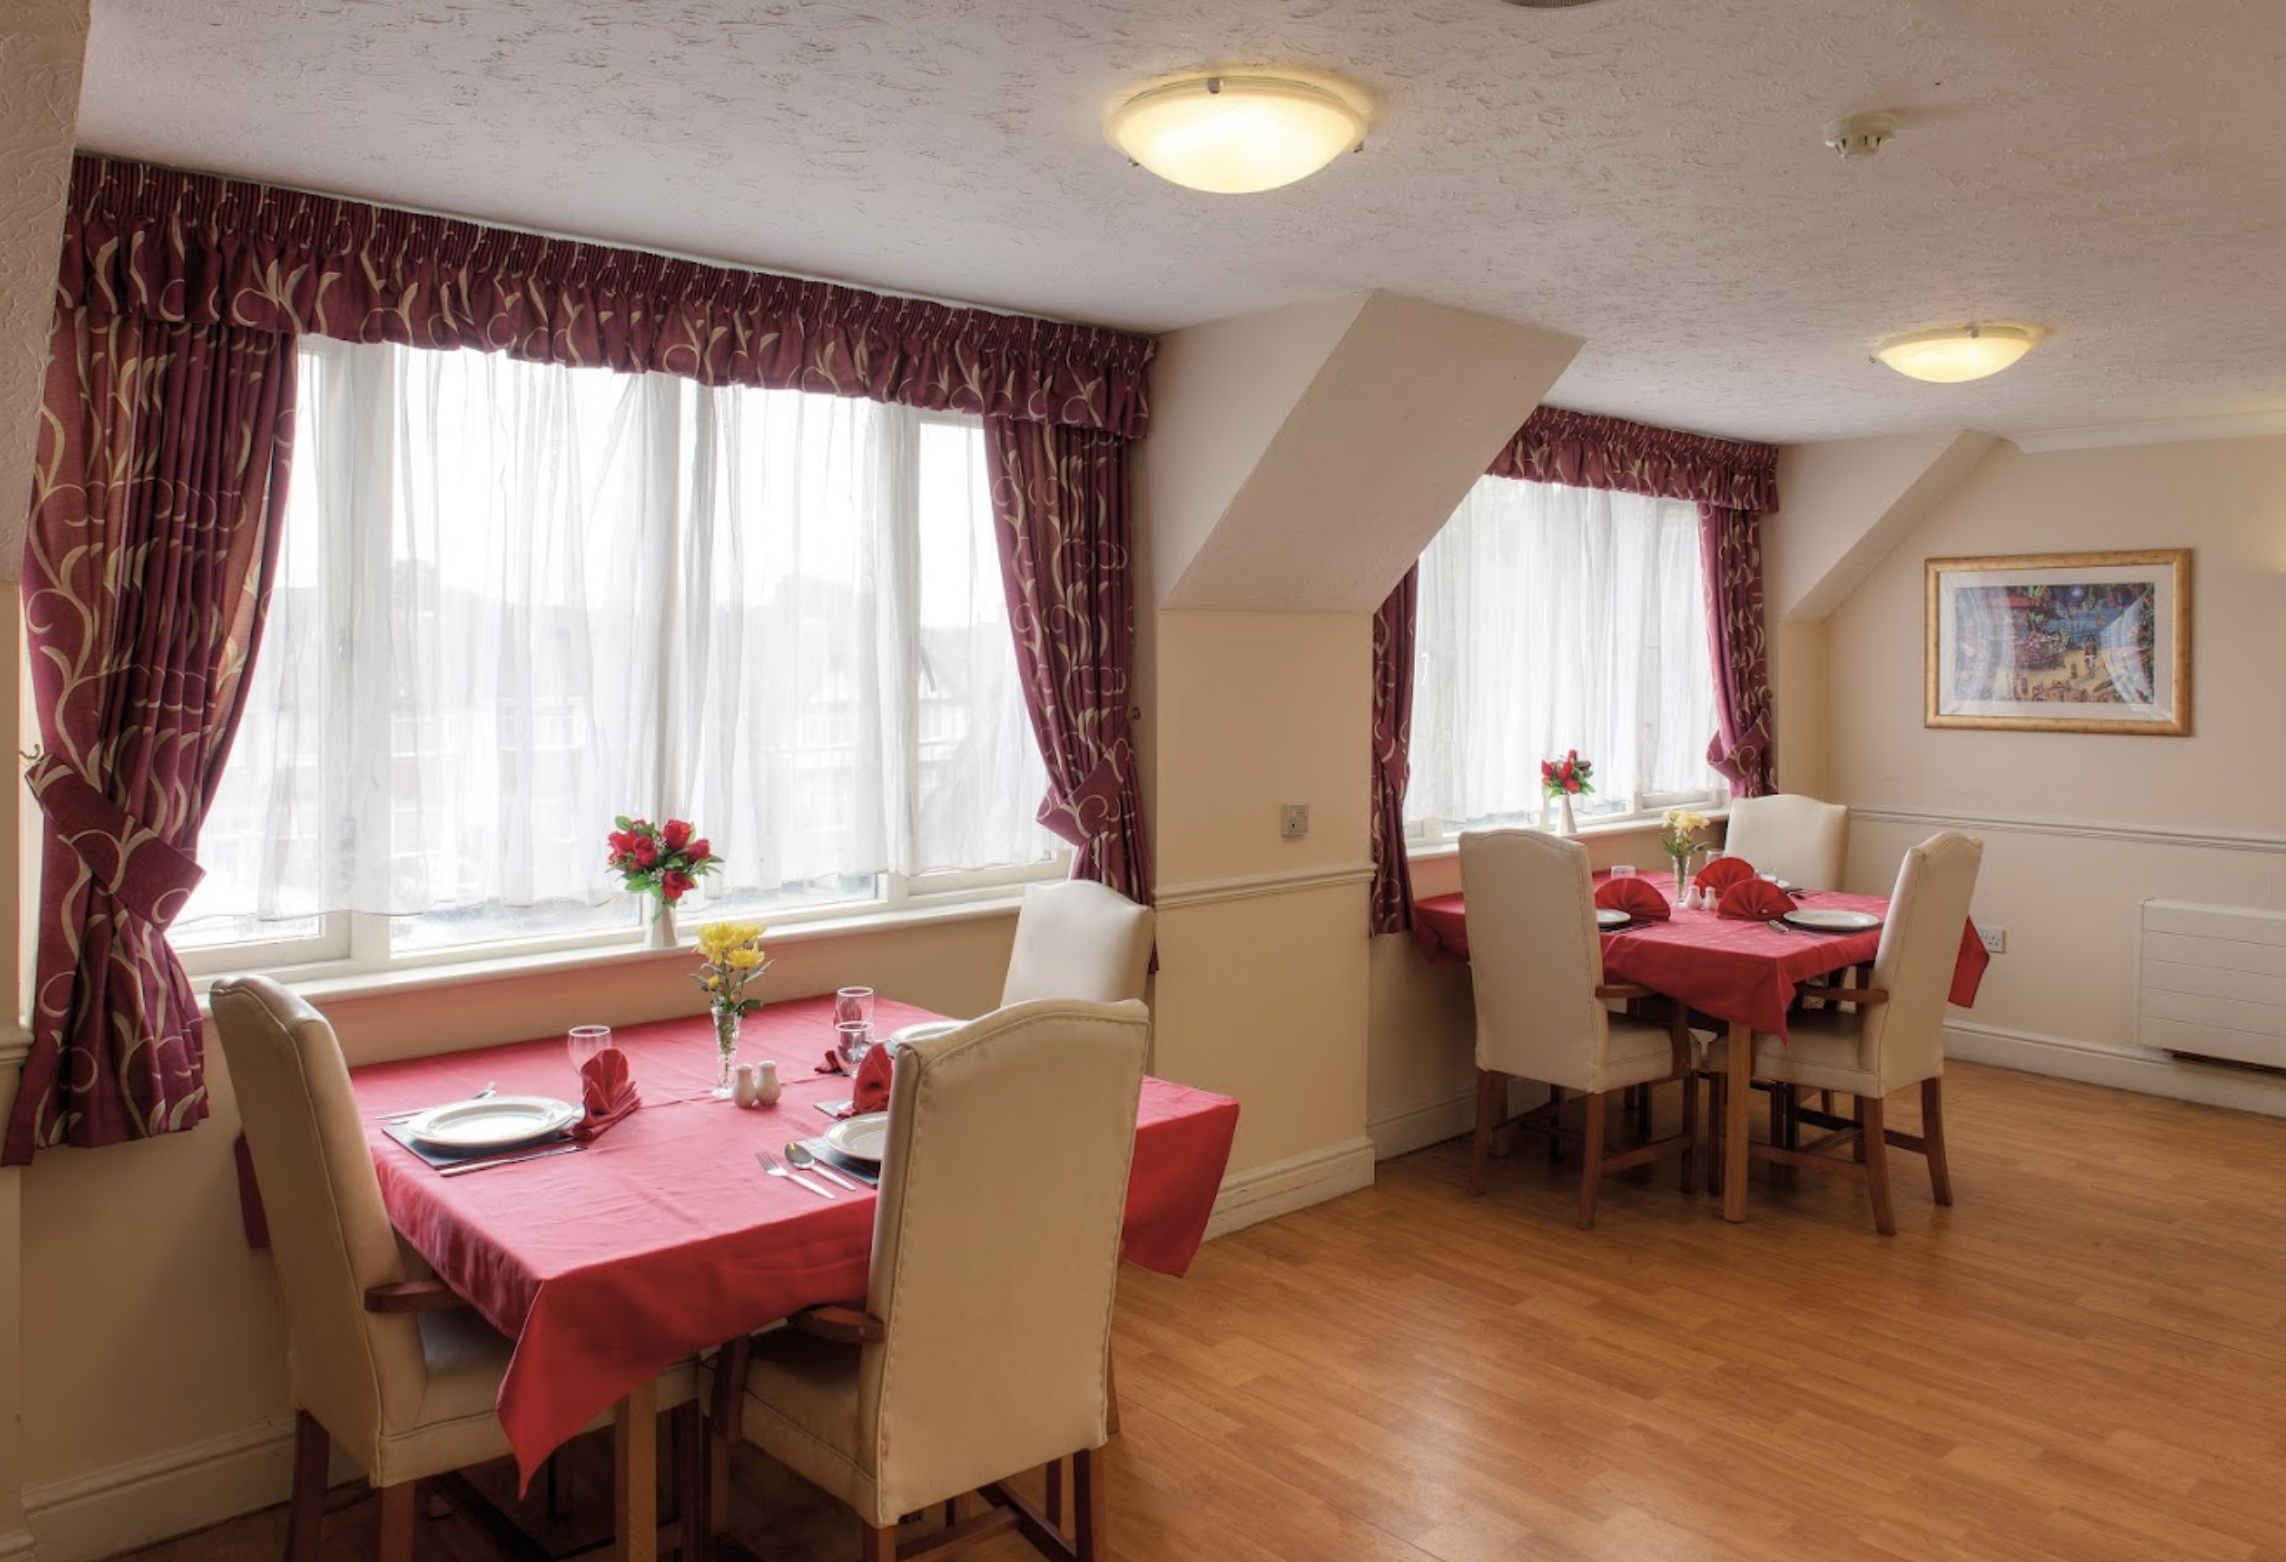 Dining room of Middlesex Manor care home in Wembley, London